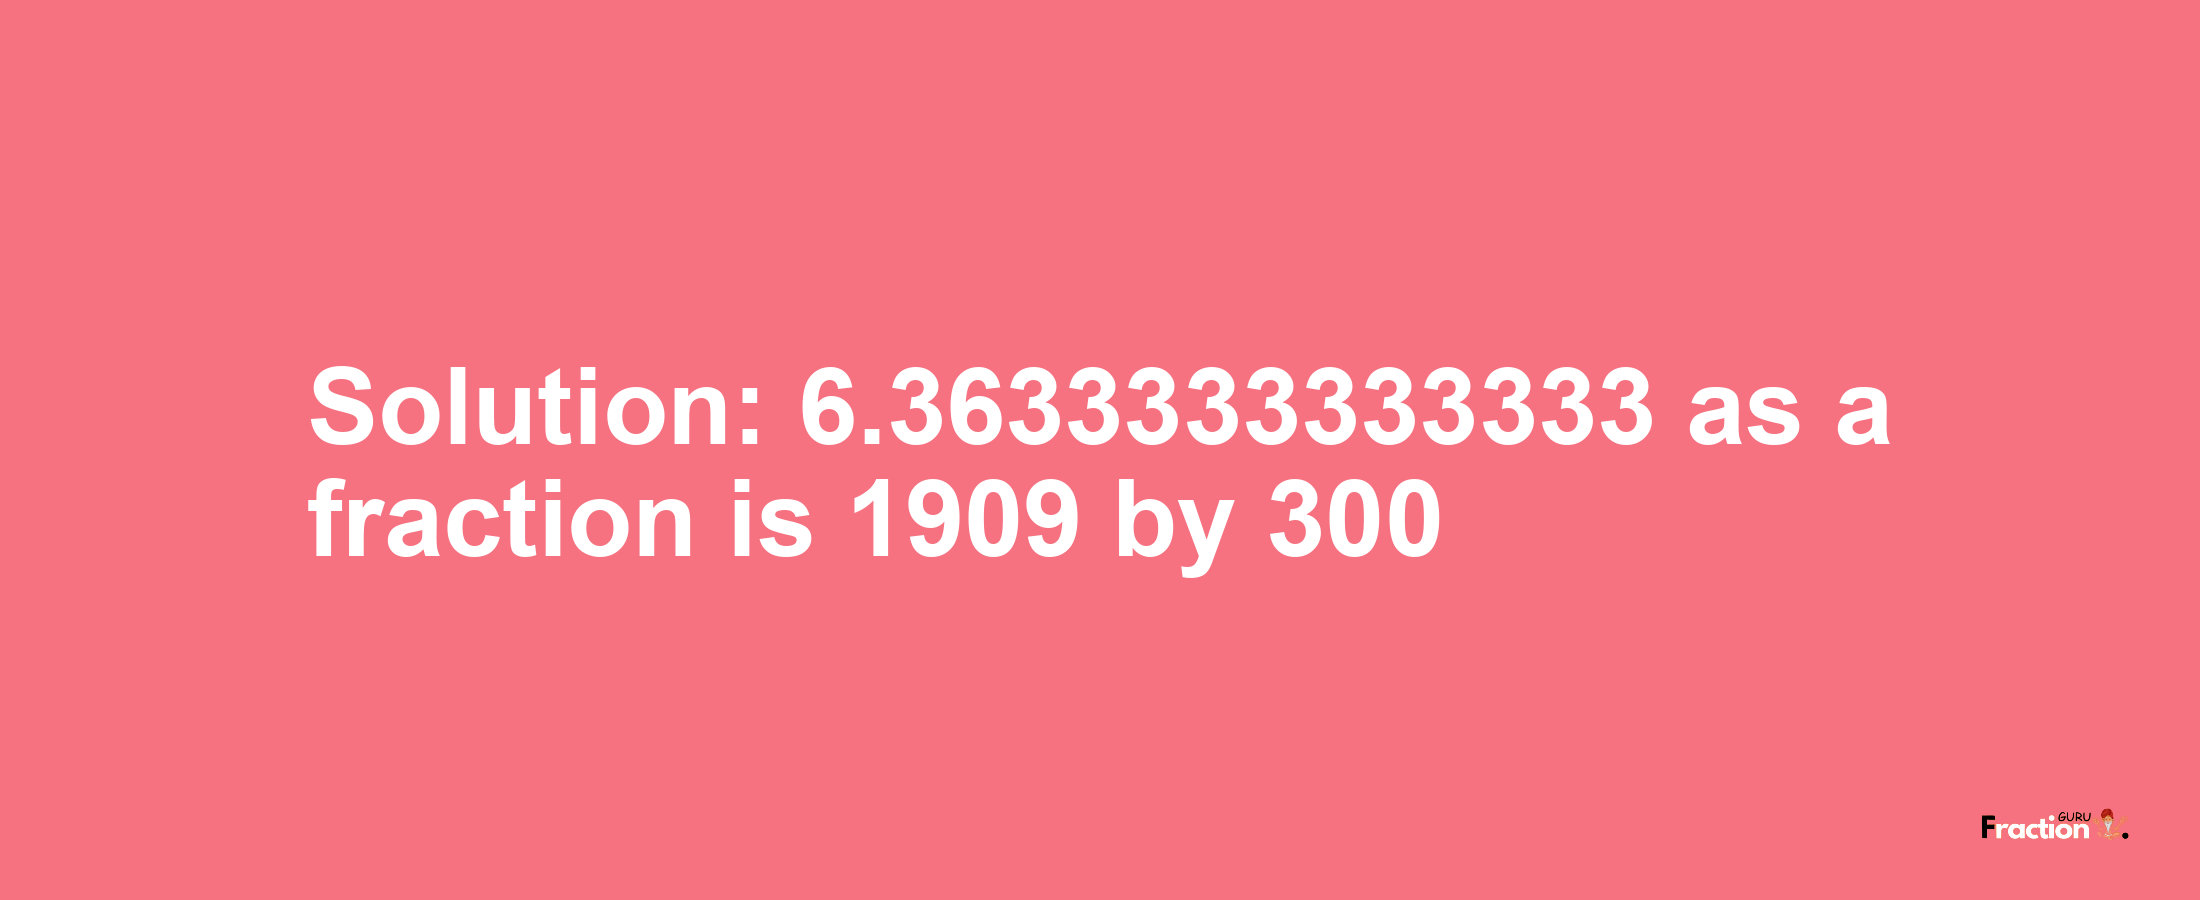 Solution:6.3633333333333 as a fraction is 1909/300